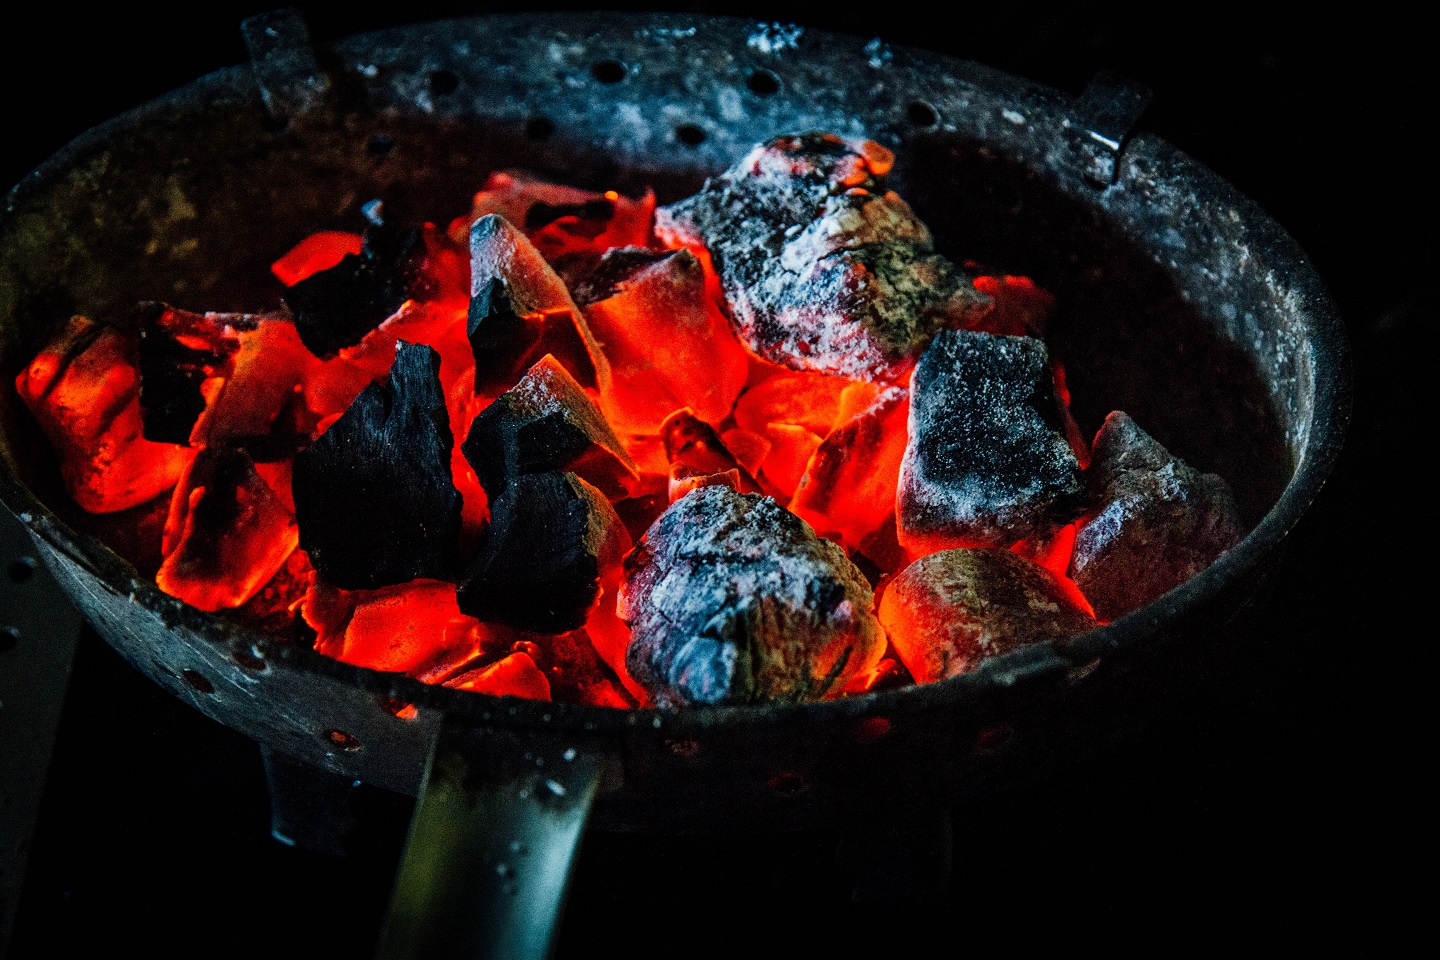 Coal is the most cost effective fuel for BBQ parties at home